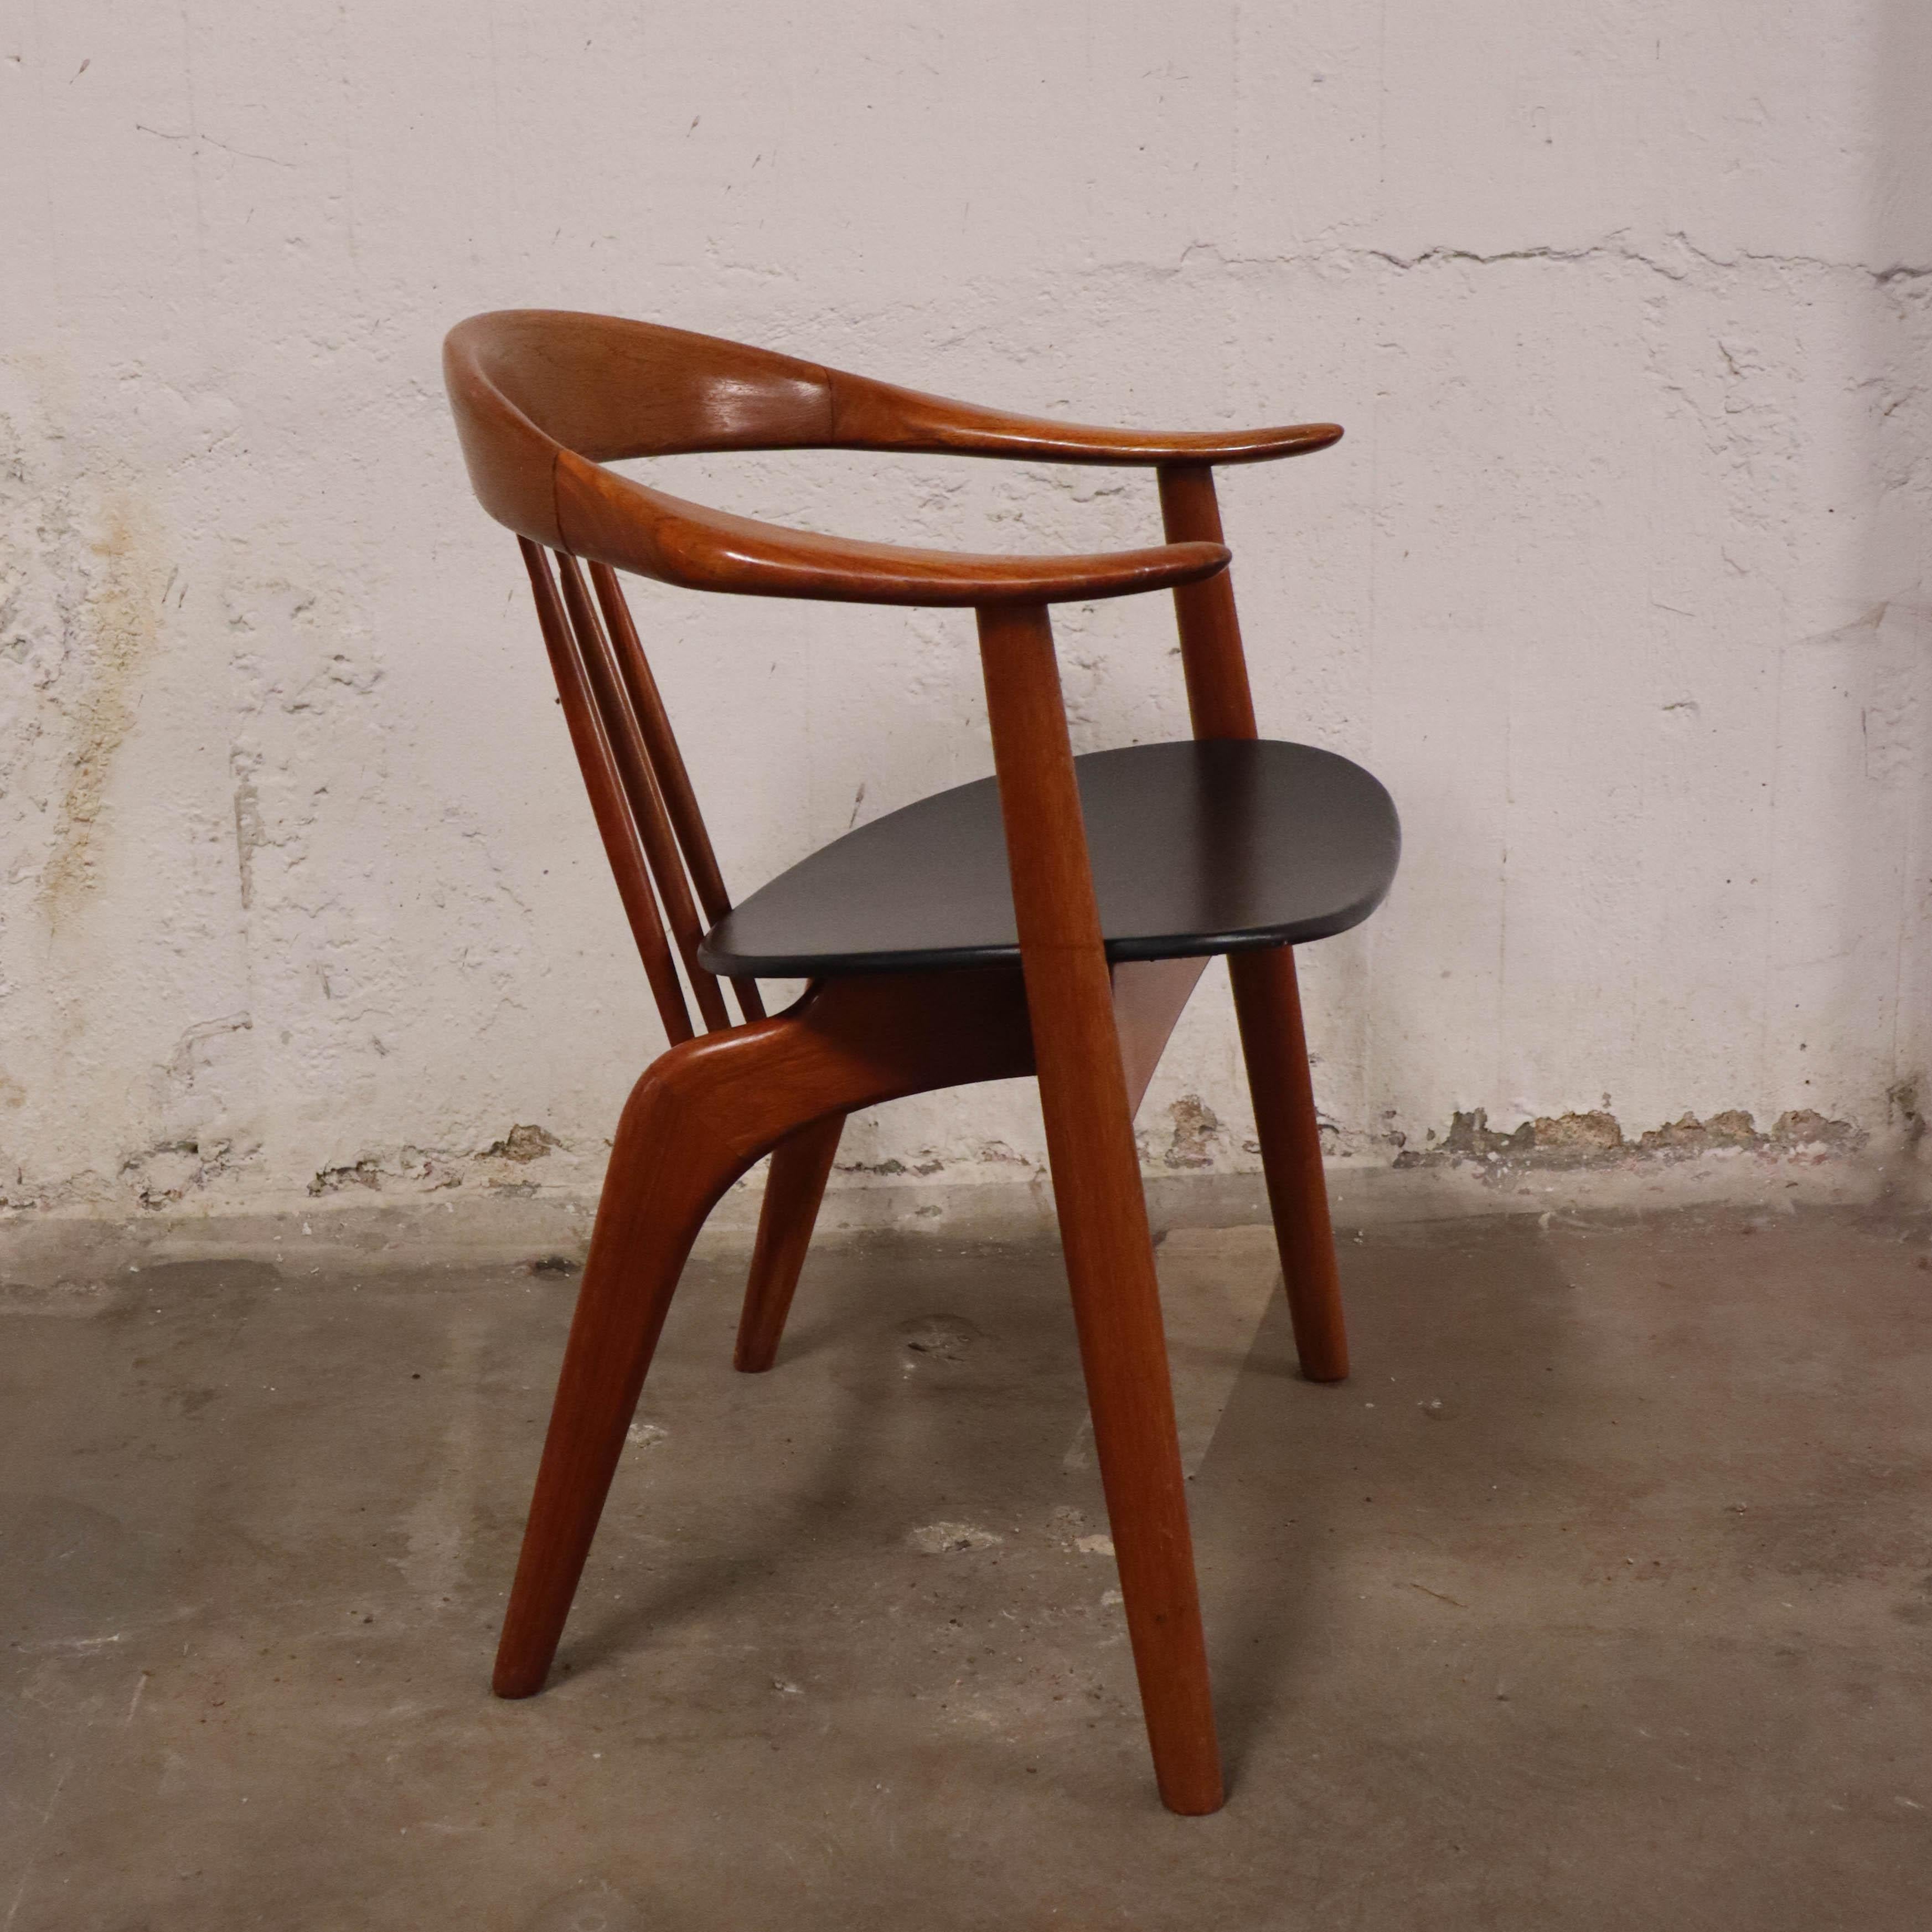 A chair of model 408 designed by Arne Hovmand Olsen at Mogens Kold Møbelfabrik, Denmark, 1950s. The chair is made in teak with seat in black leather. It is 64 x 50 cm and 74 cm high with a seat height of 44 cm. It´s in very good condition except